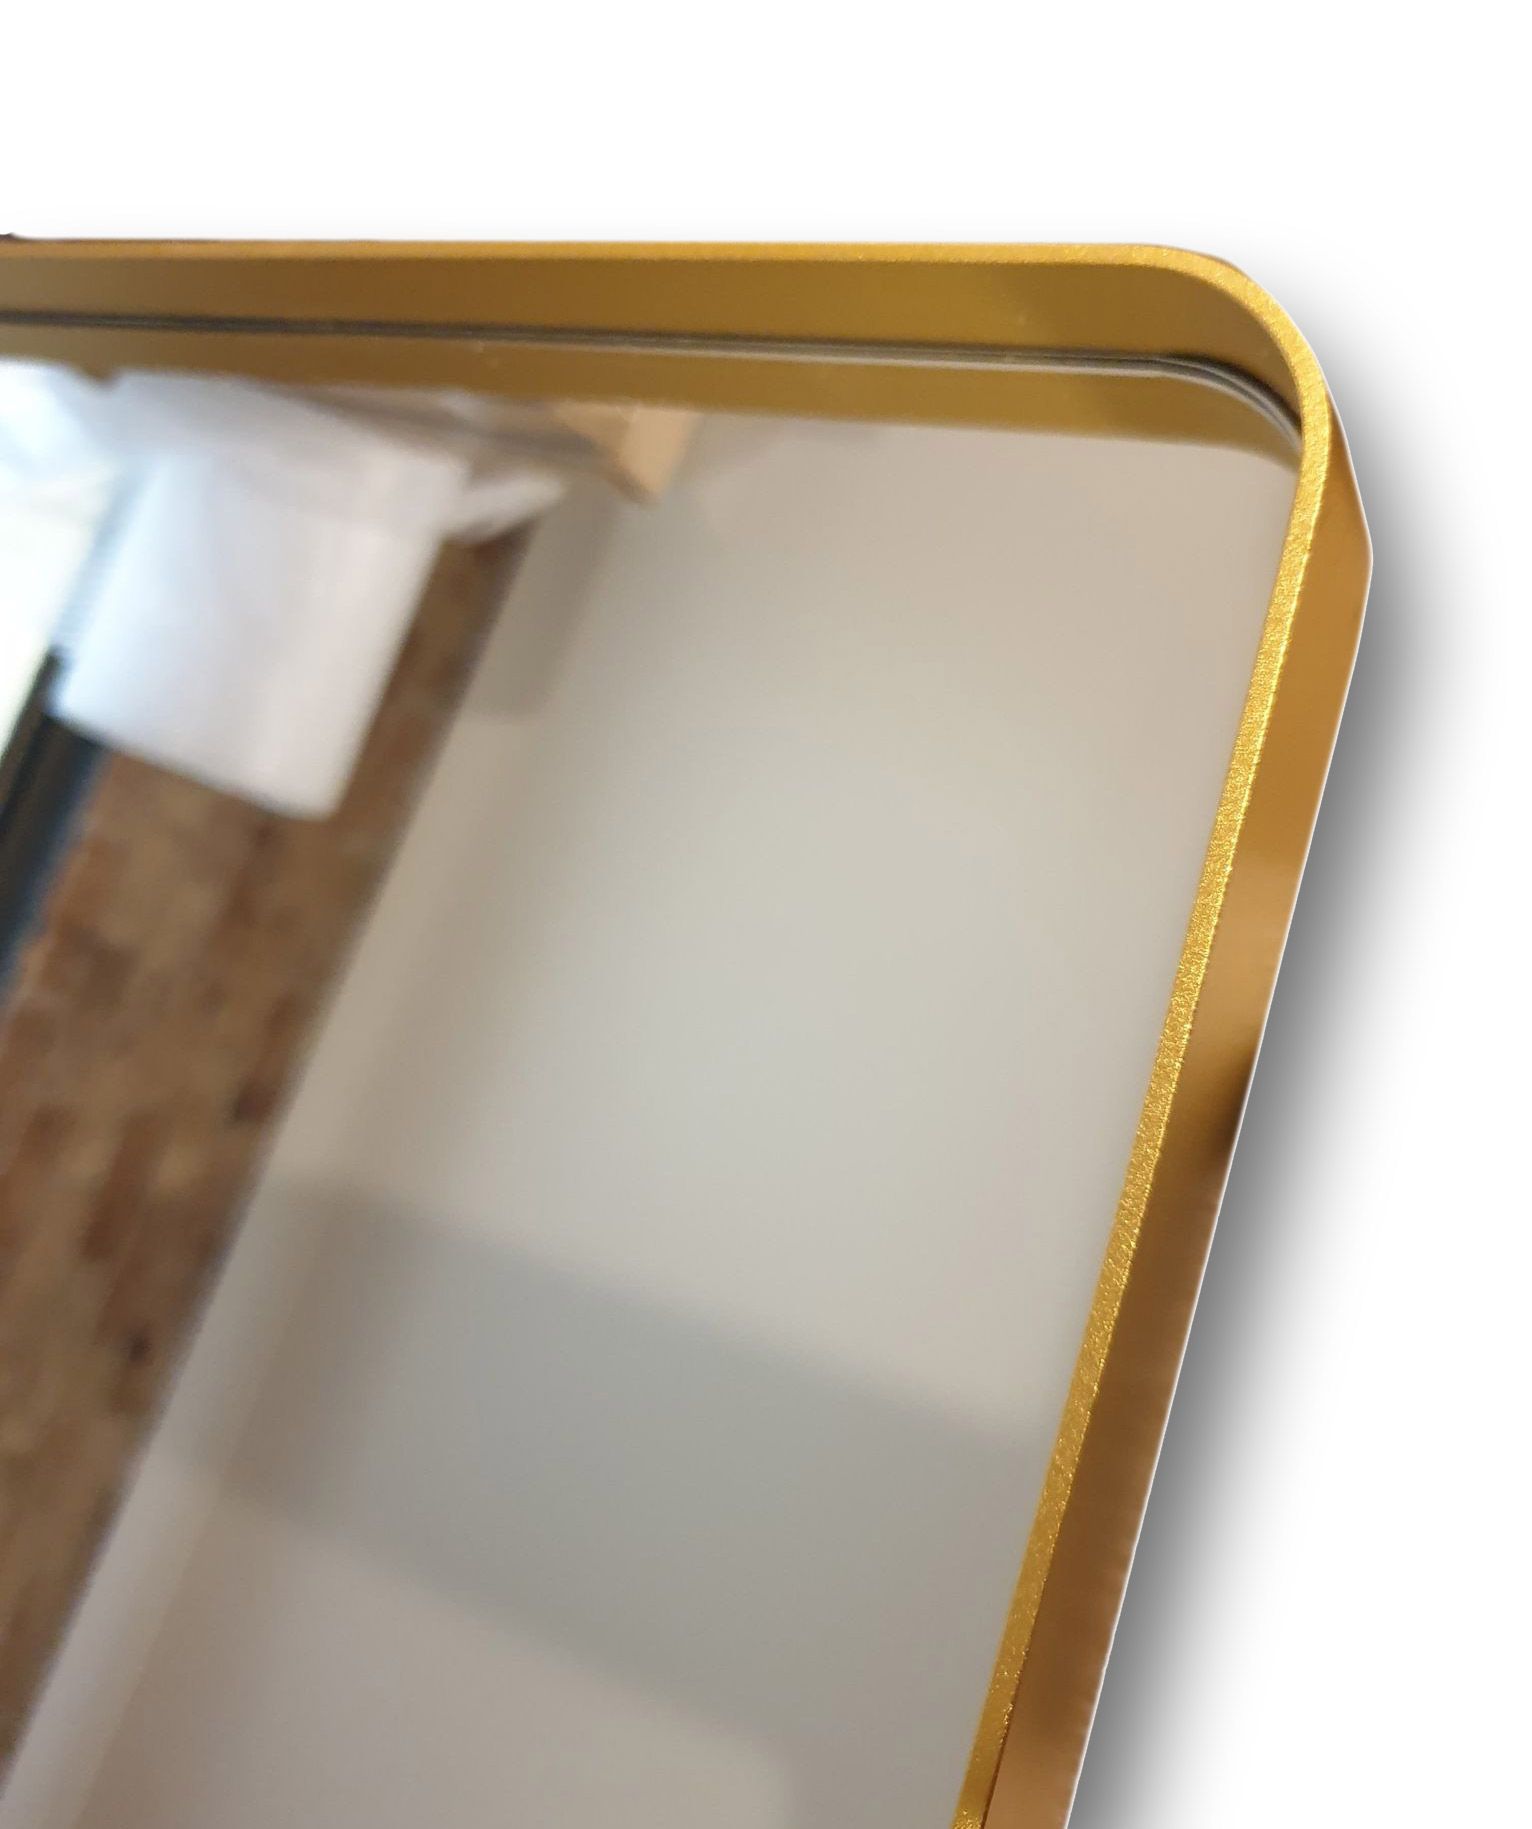 Luxe Thin Gold Metal Frame Bathroom Mirror – 120Cm X 80Cm With Gold Modern Luxe Wall Mirrors (View 7 of 15)